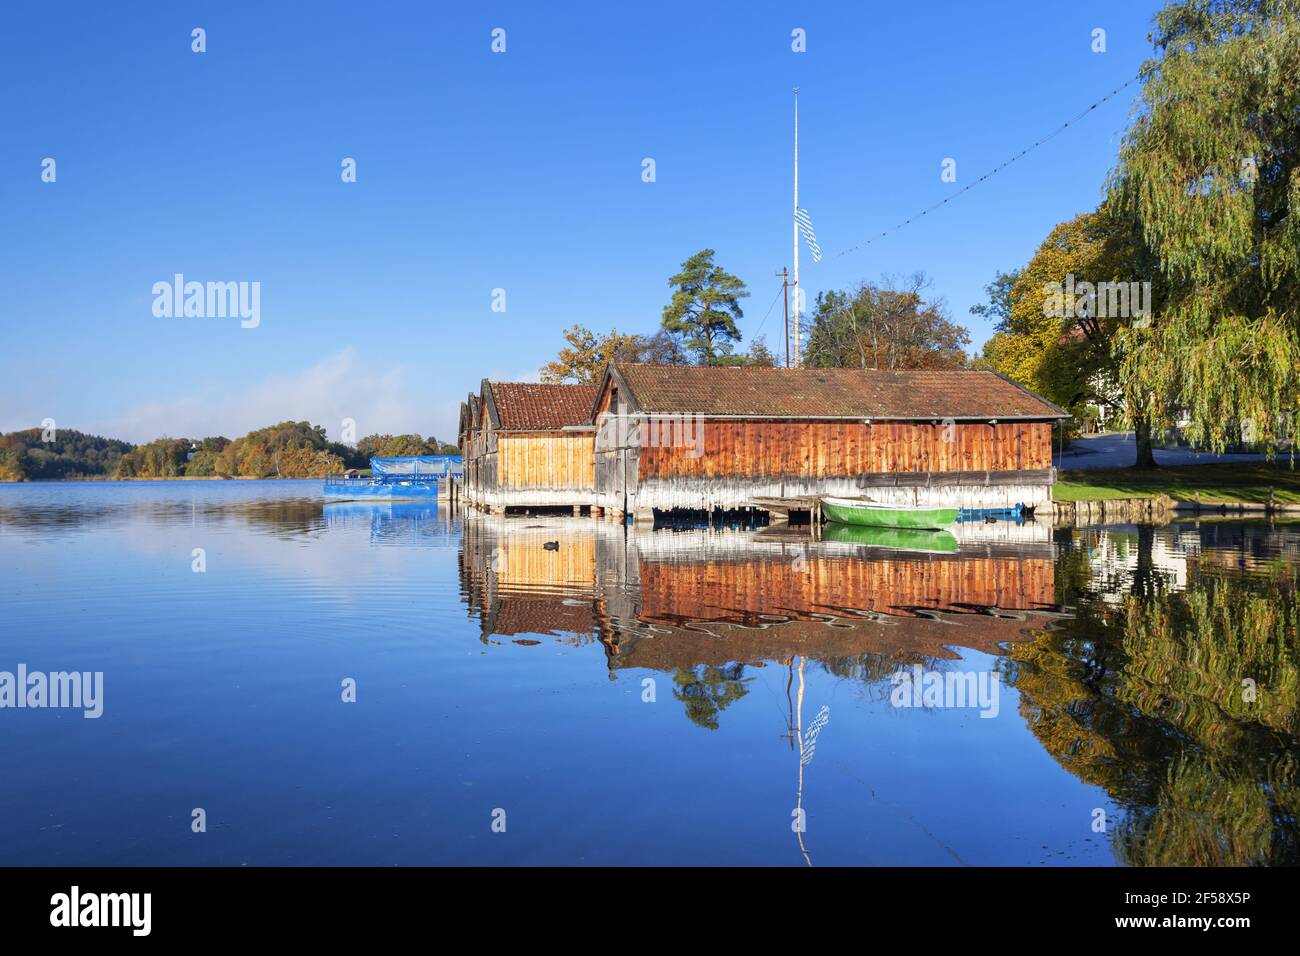 Geographie / Reisen, Deutschland, Bayern, Seehaus Staffelsee (See Staffel), Bootsschuppen A, Additional-Rights-Clearance-Info-not-available Stockfoto